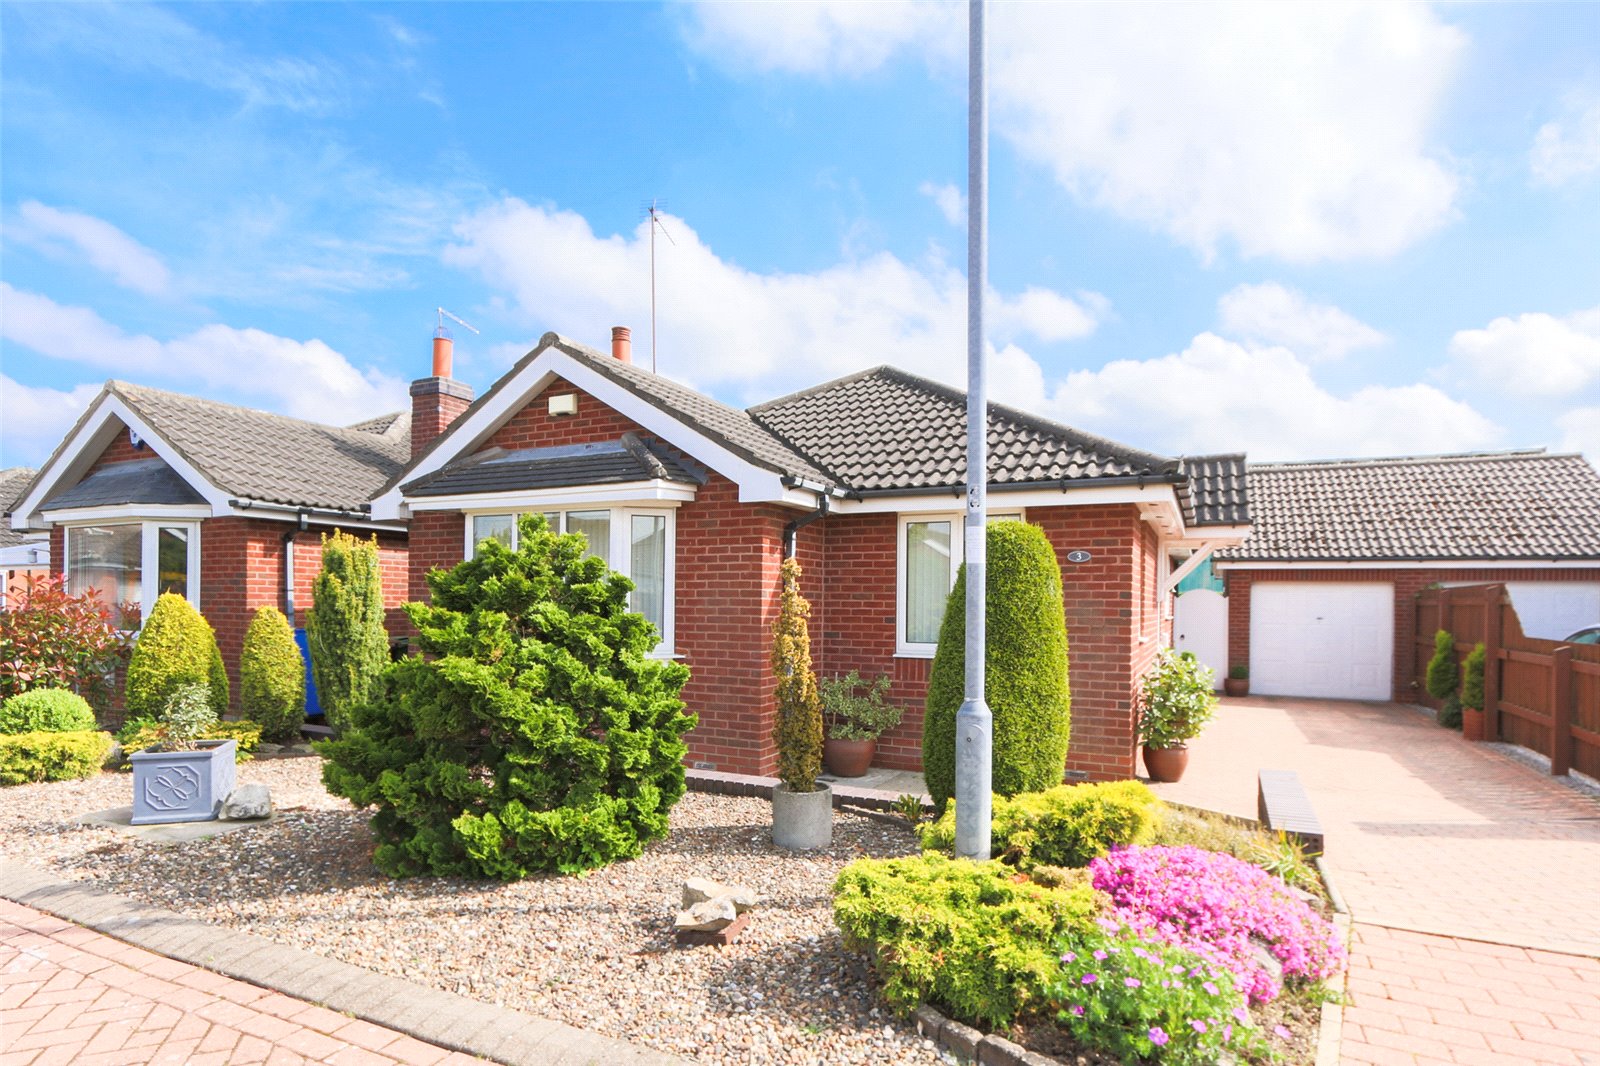 3 bed bungalow for sale in Whitehouse Walk, Dunswell, HU6 